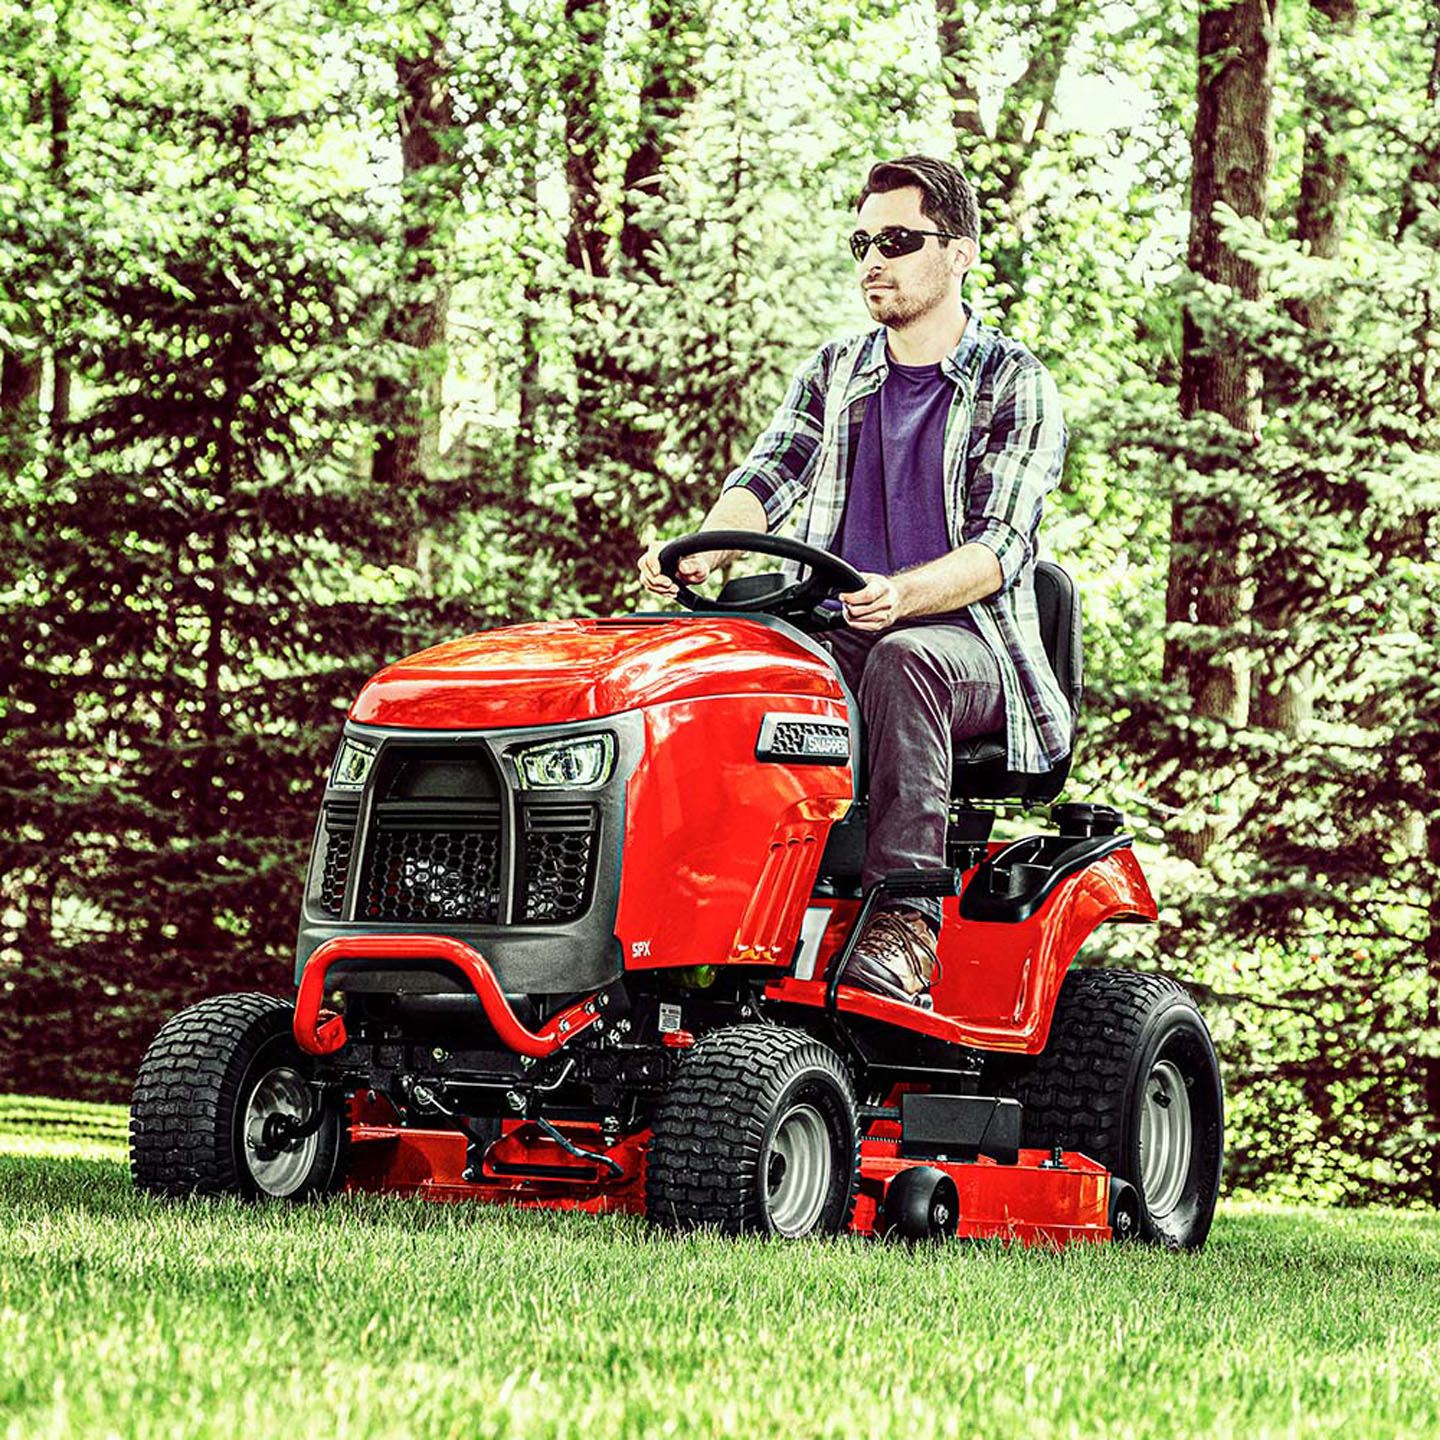 2022 Snapper SPX 42 in. Briggs & Stratton 23 hp in Rice Lake, Wisconsin - Photo 5